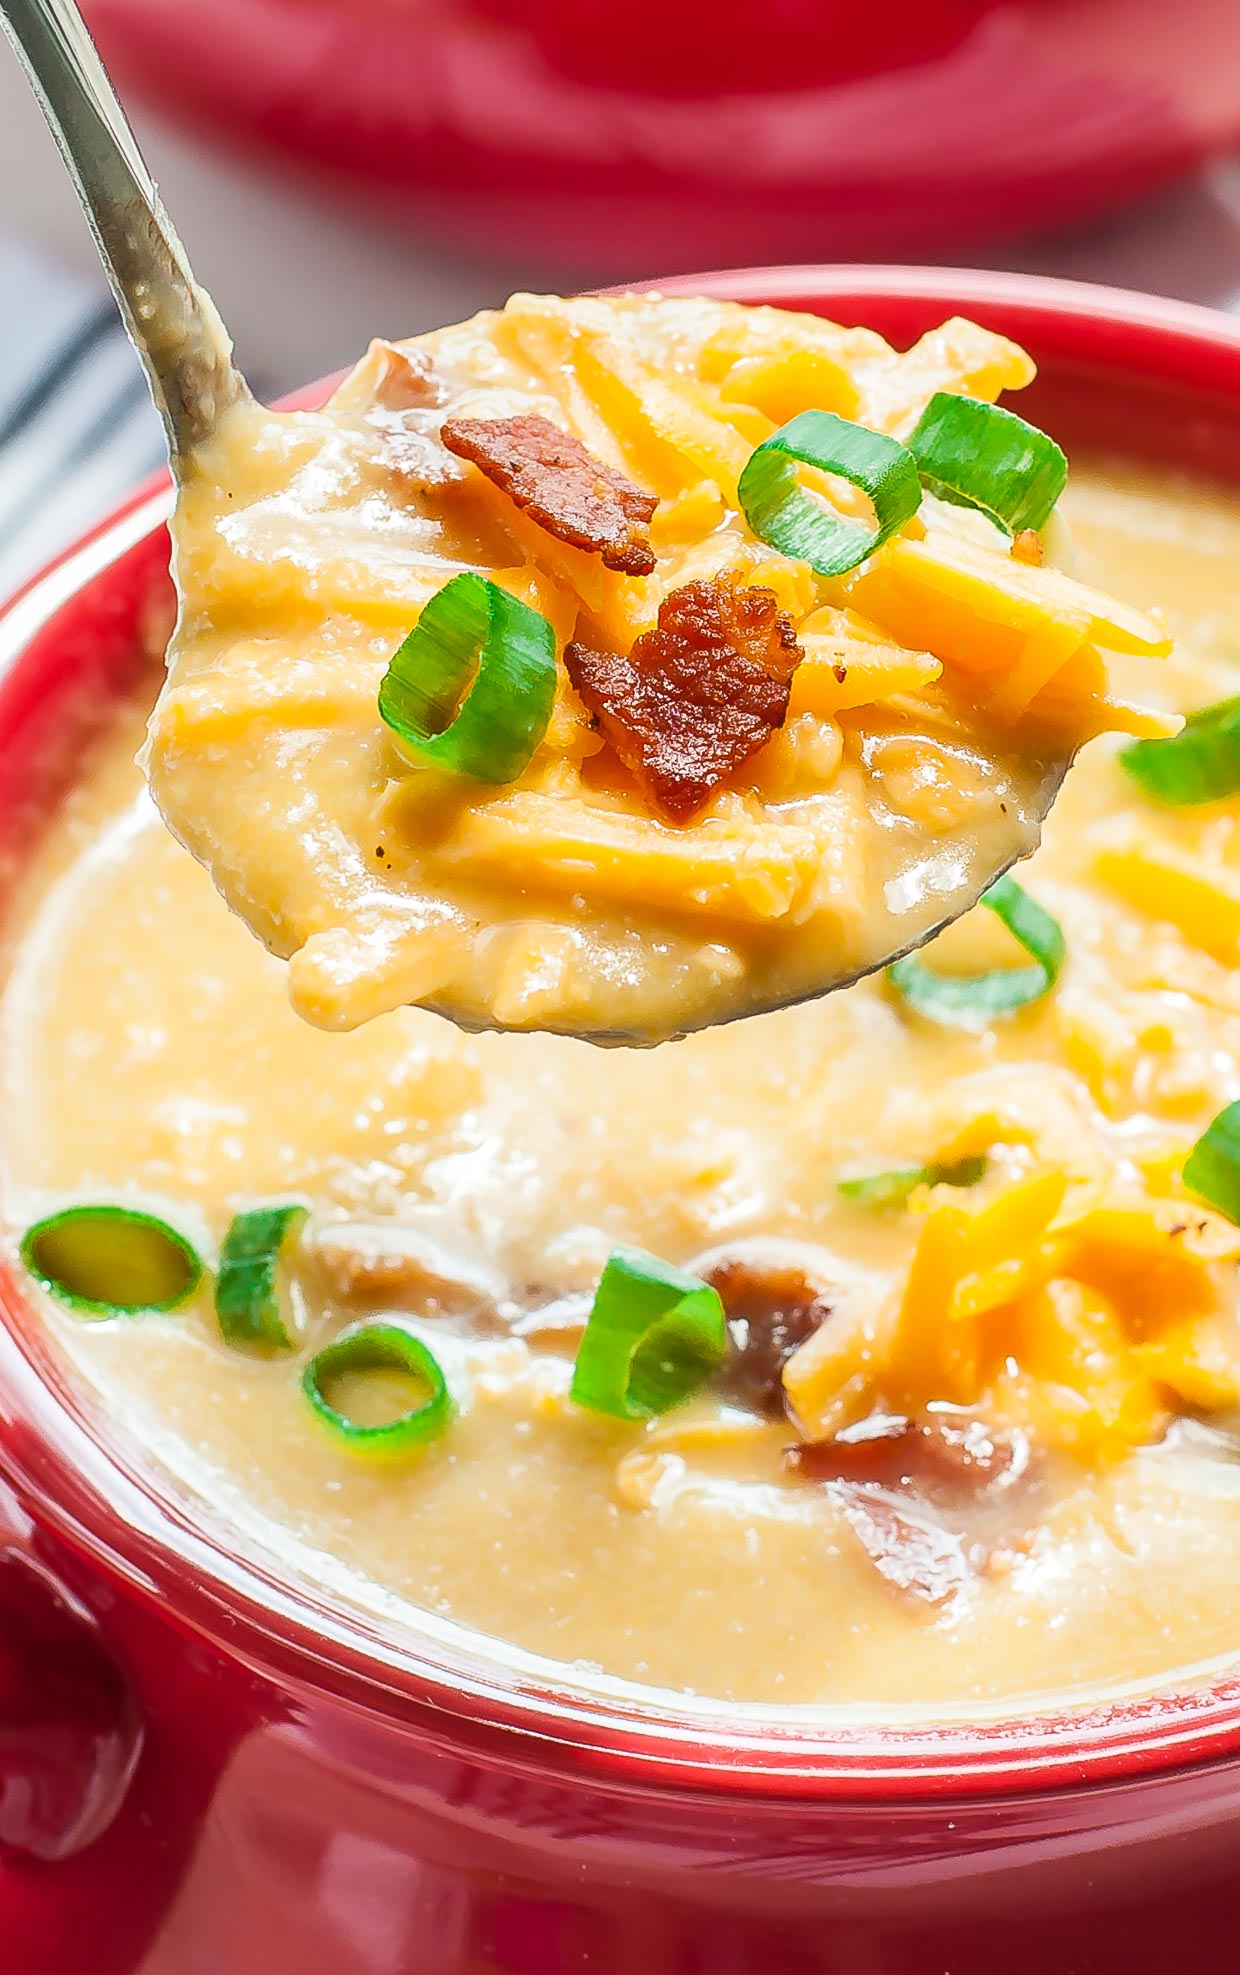 This tasty collection of potato soup recipes features traditional favorites plus a few creative spins on the classic!